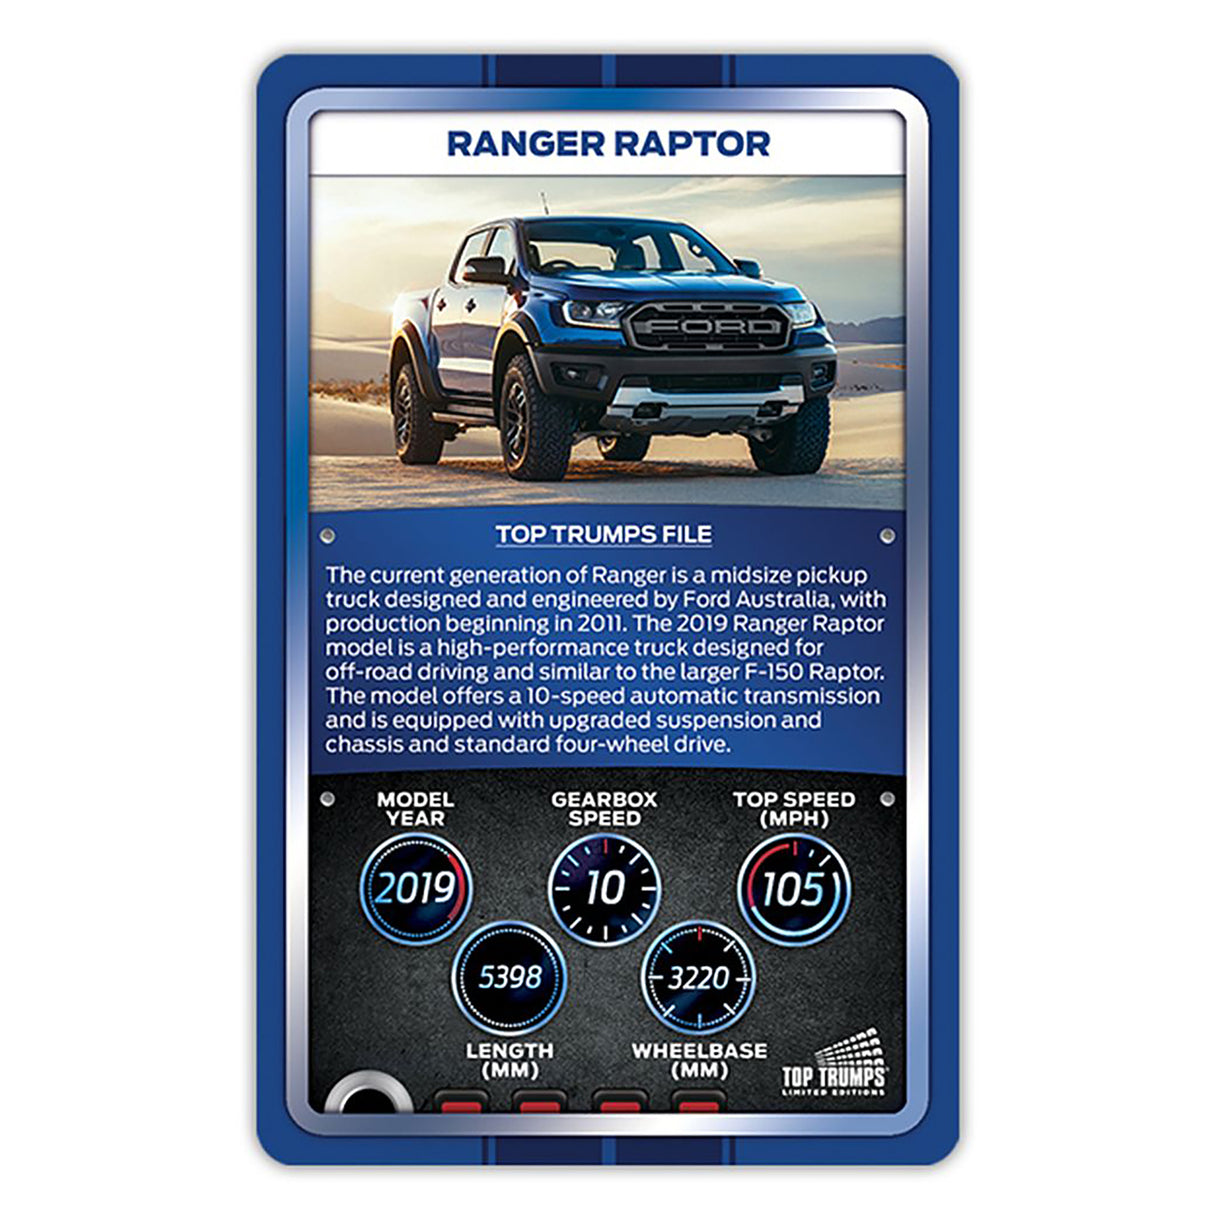 Top Trumps Ford Card Game